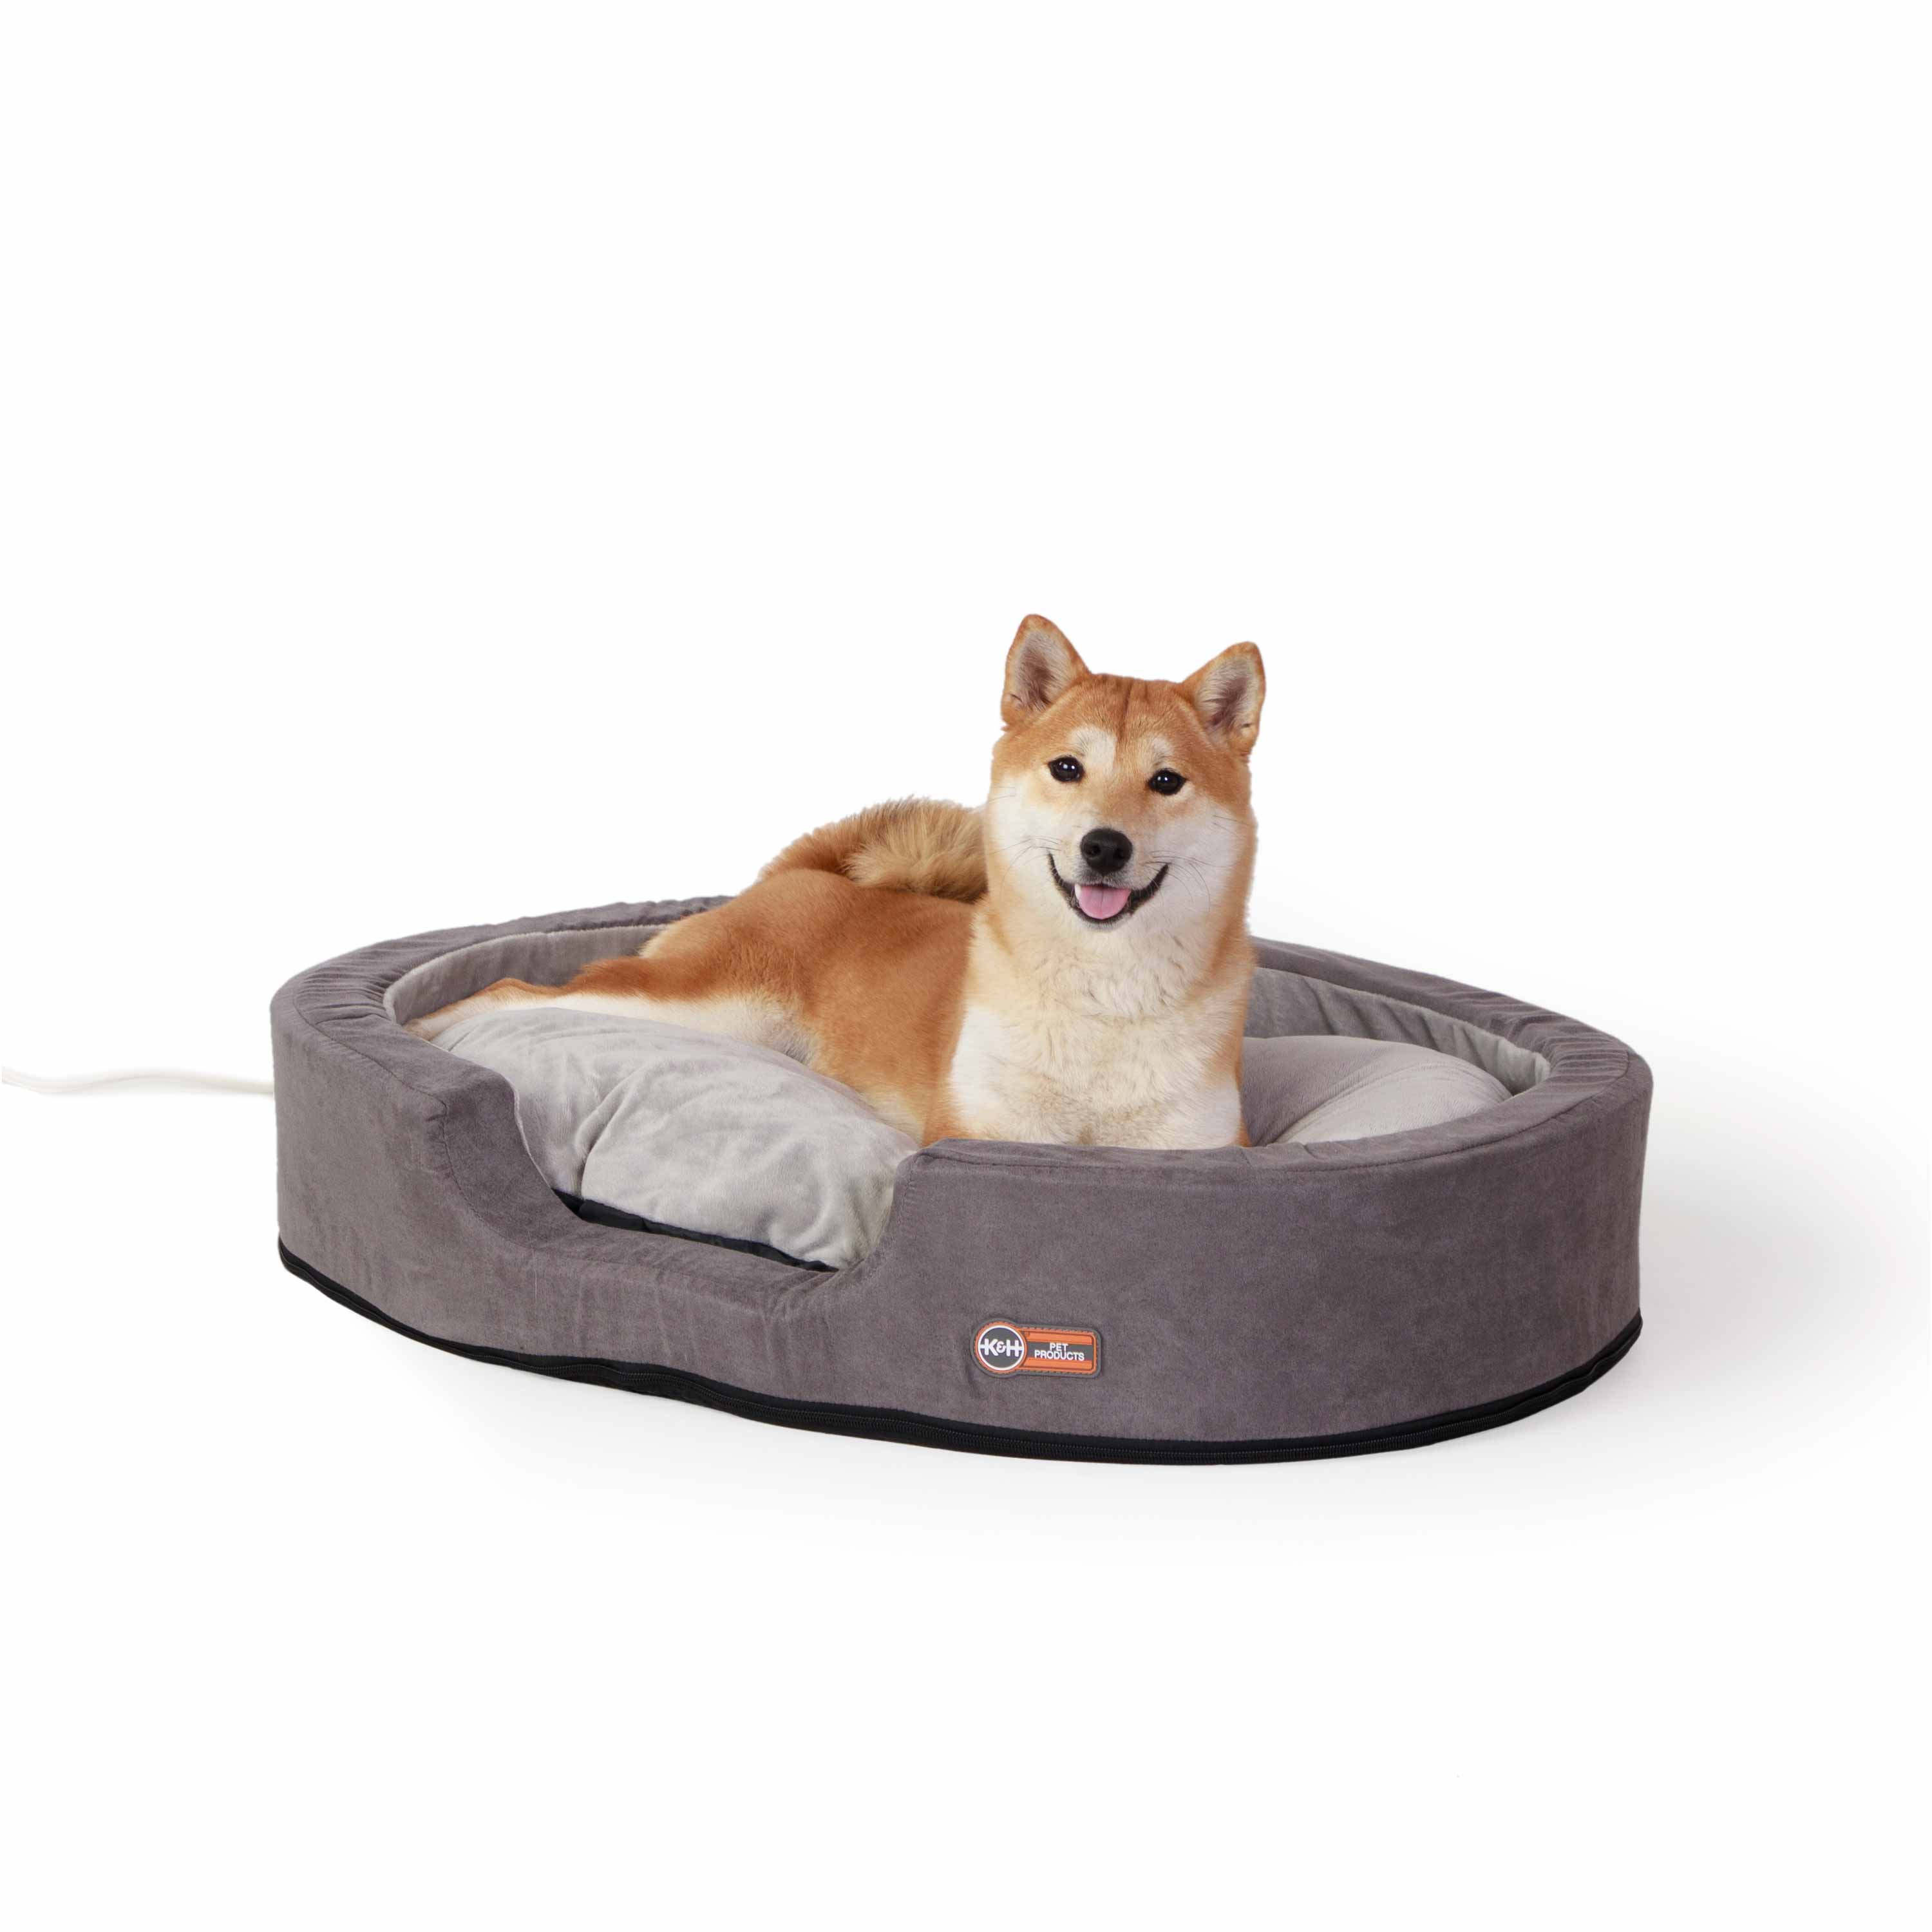 kh100546498 Thermo-Snuggly Sleeper Heated Pet Bed